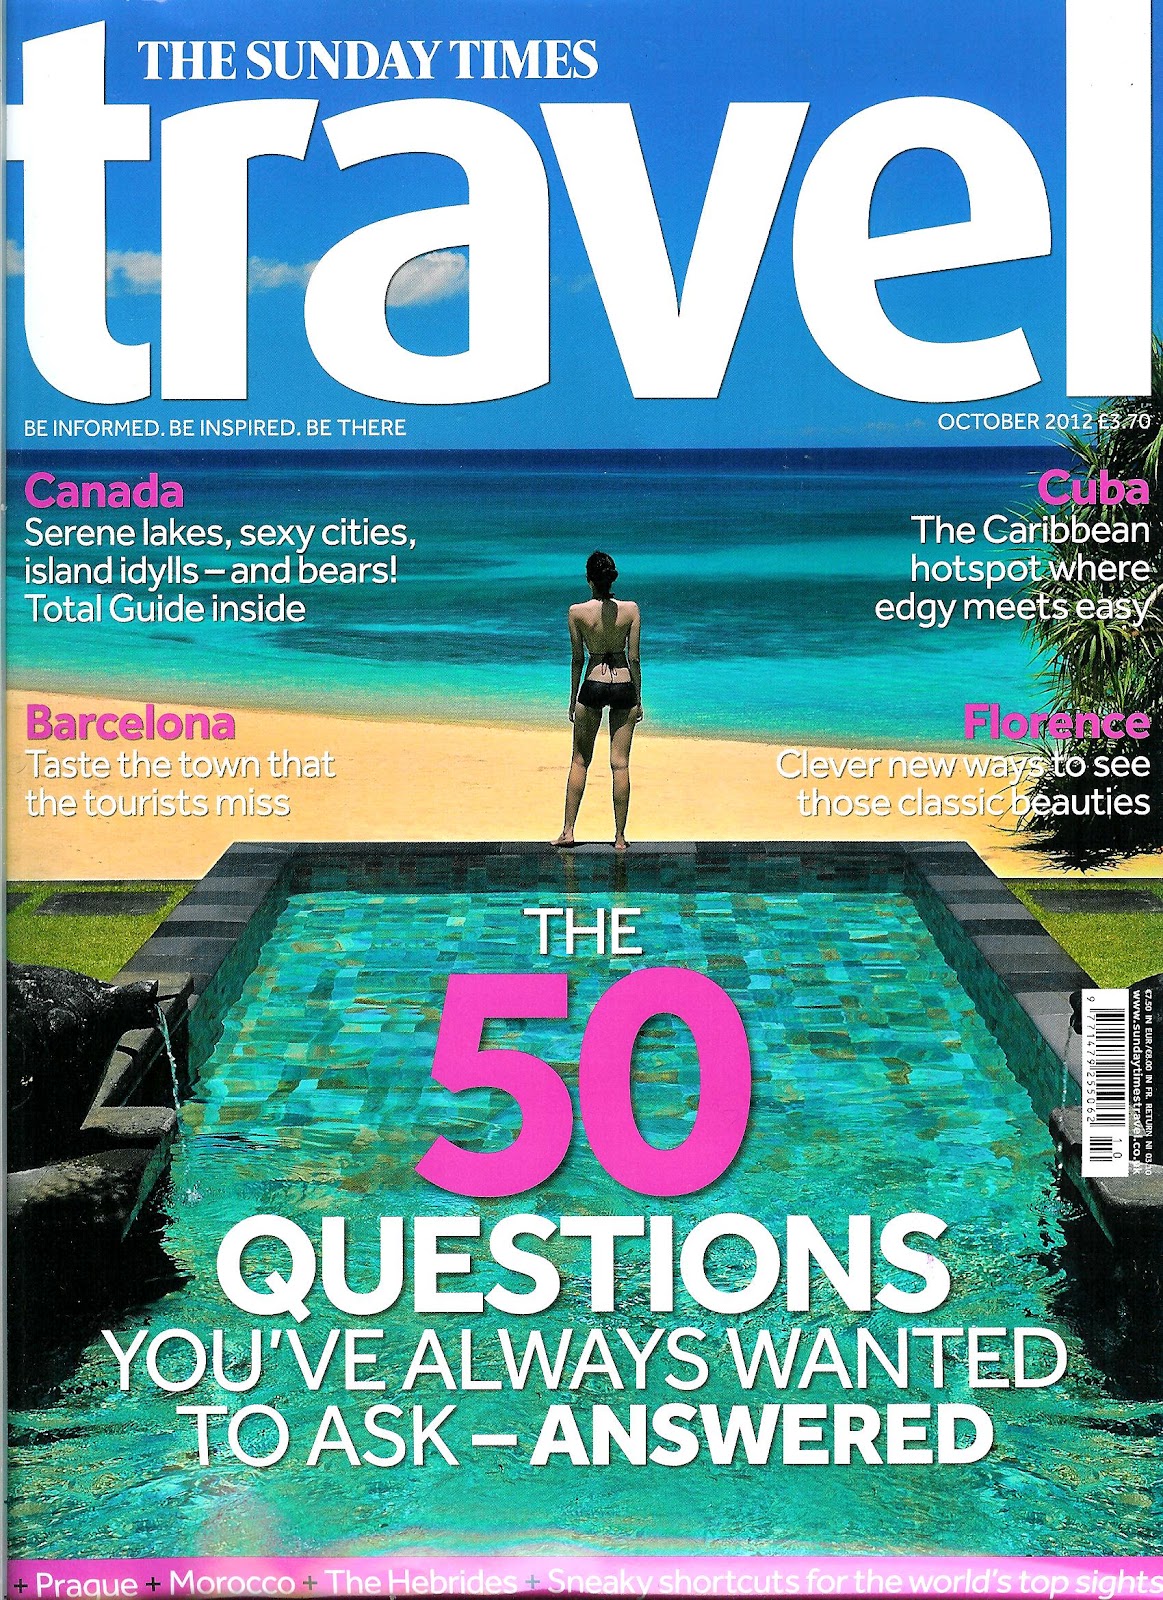 sunday times best of travel